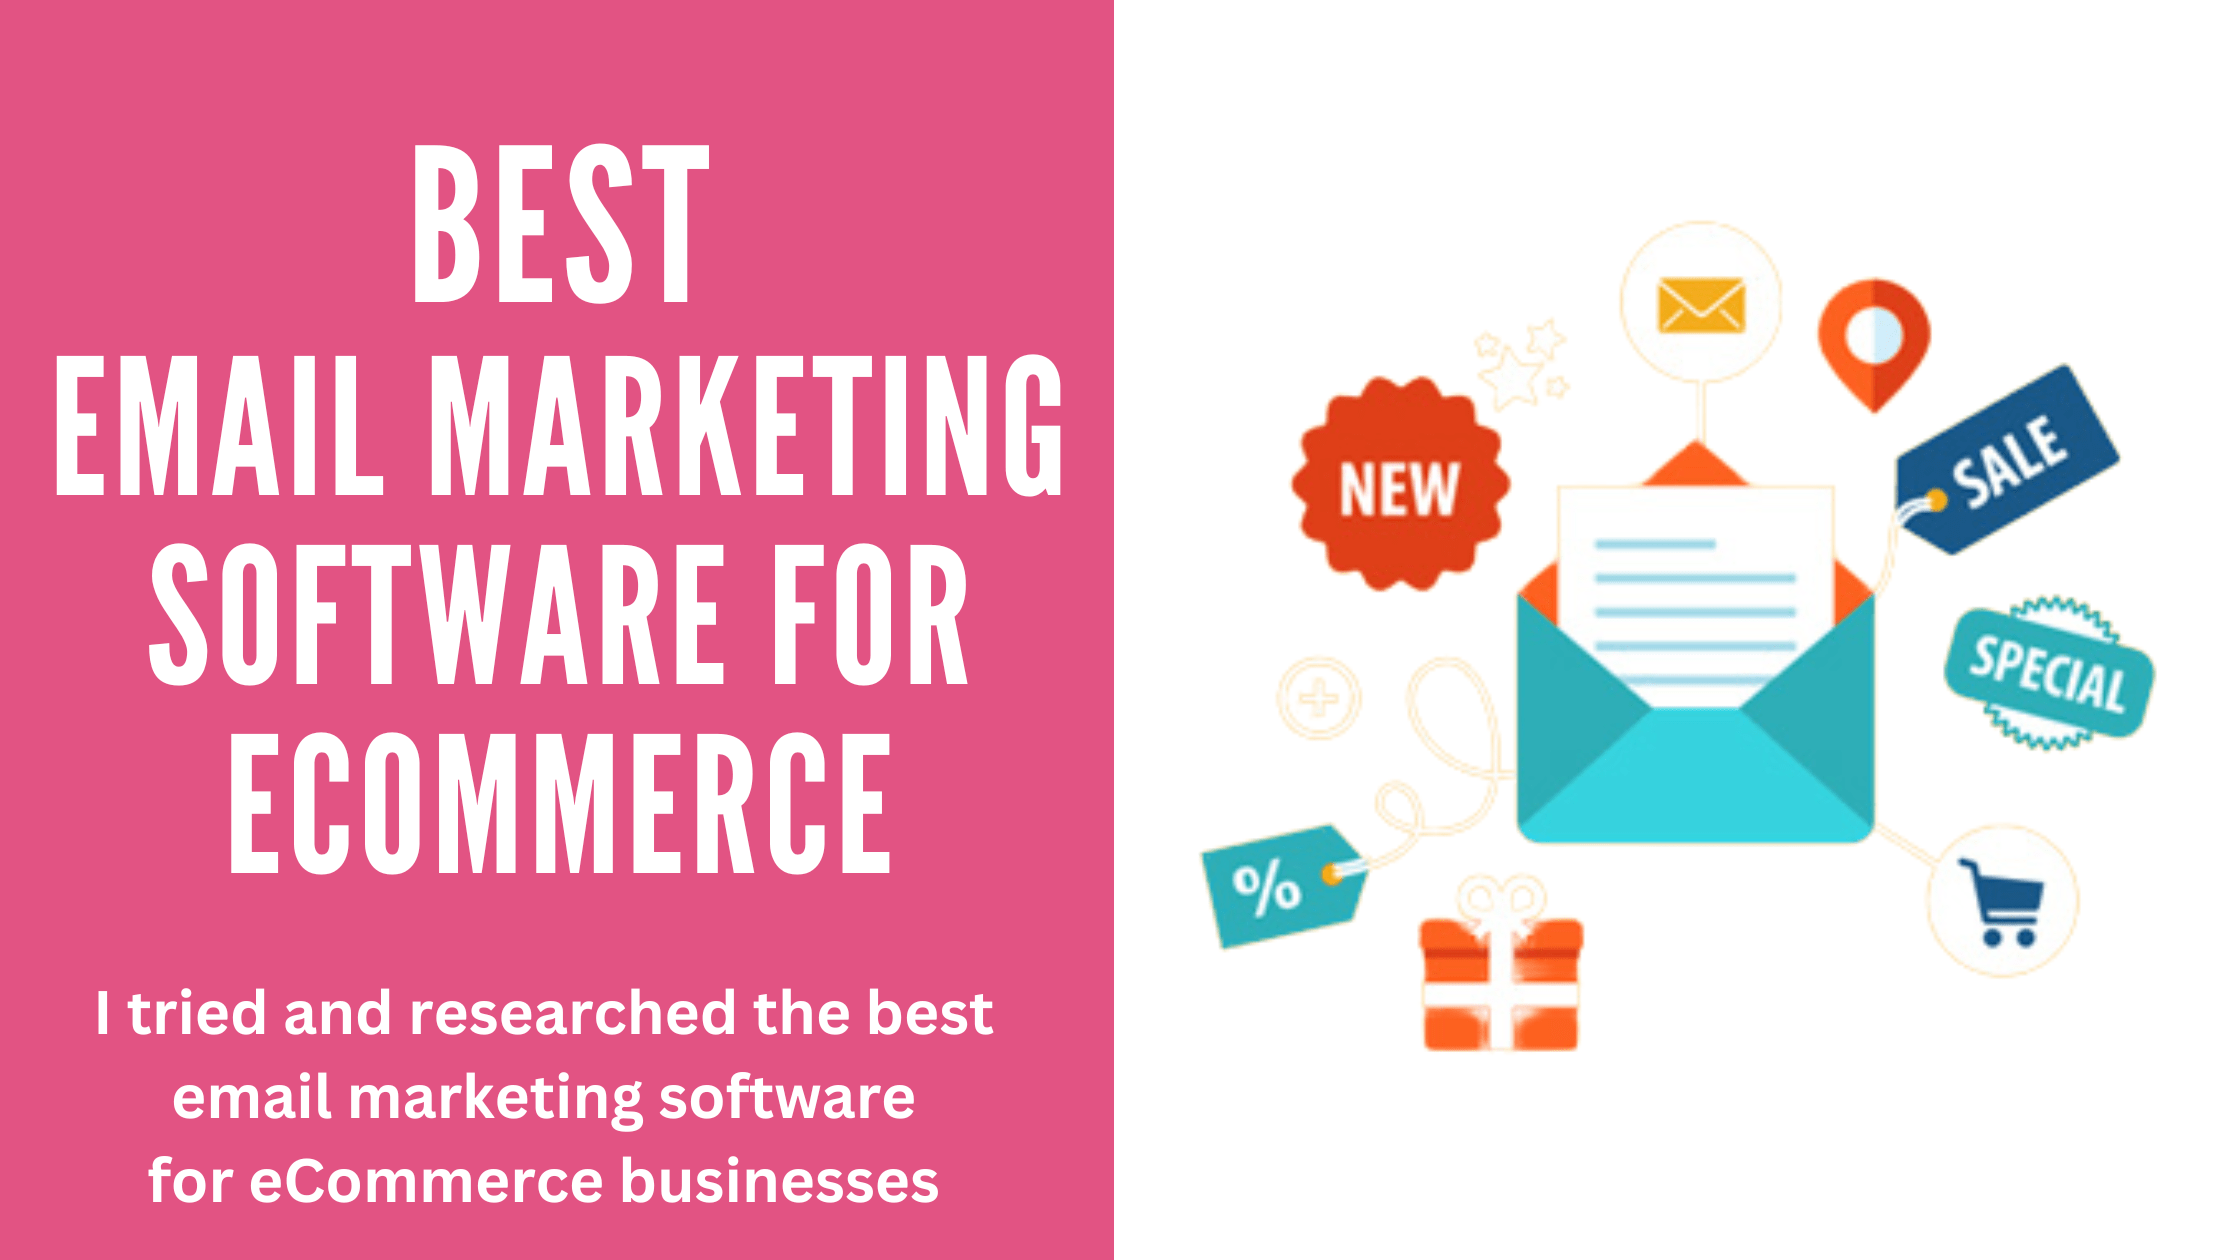 Best Email Marketing Software for Ecommerce